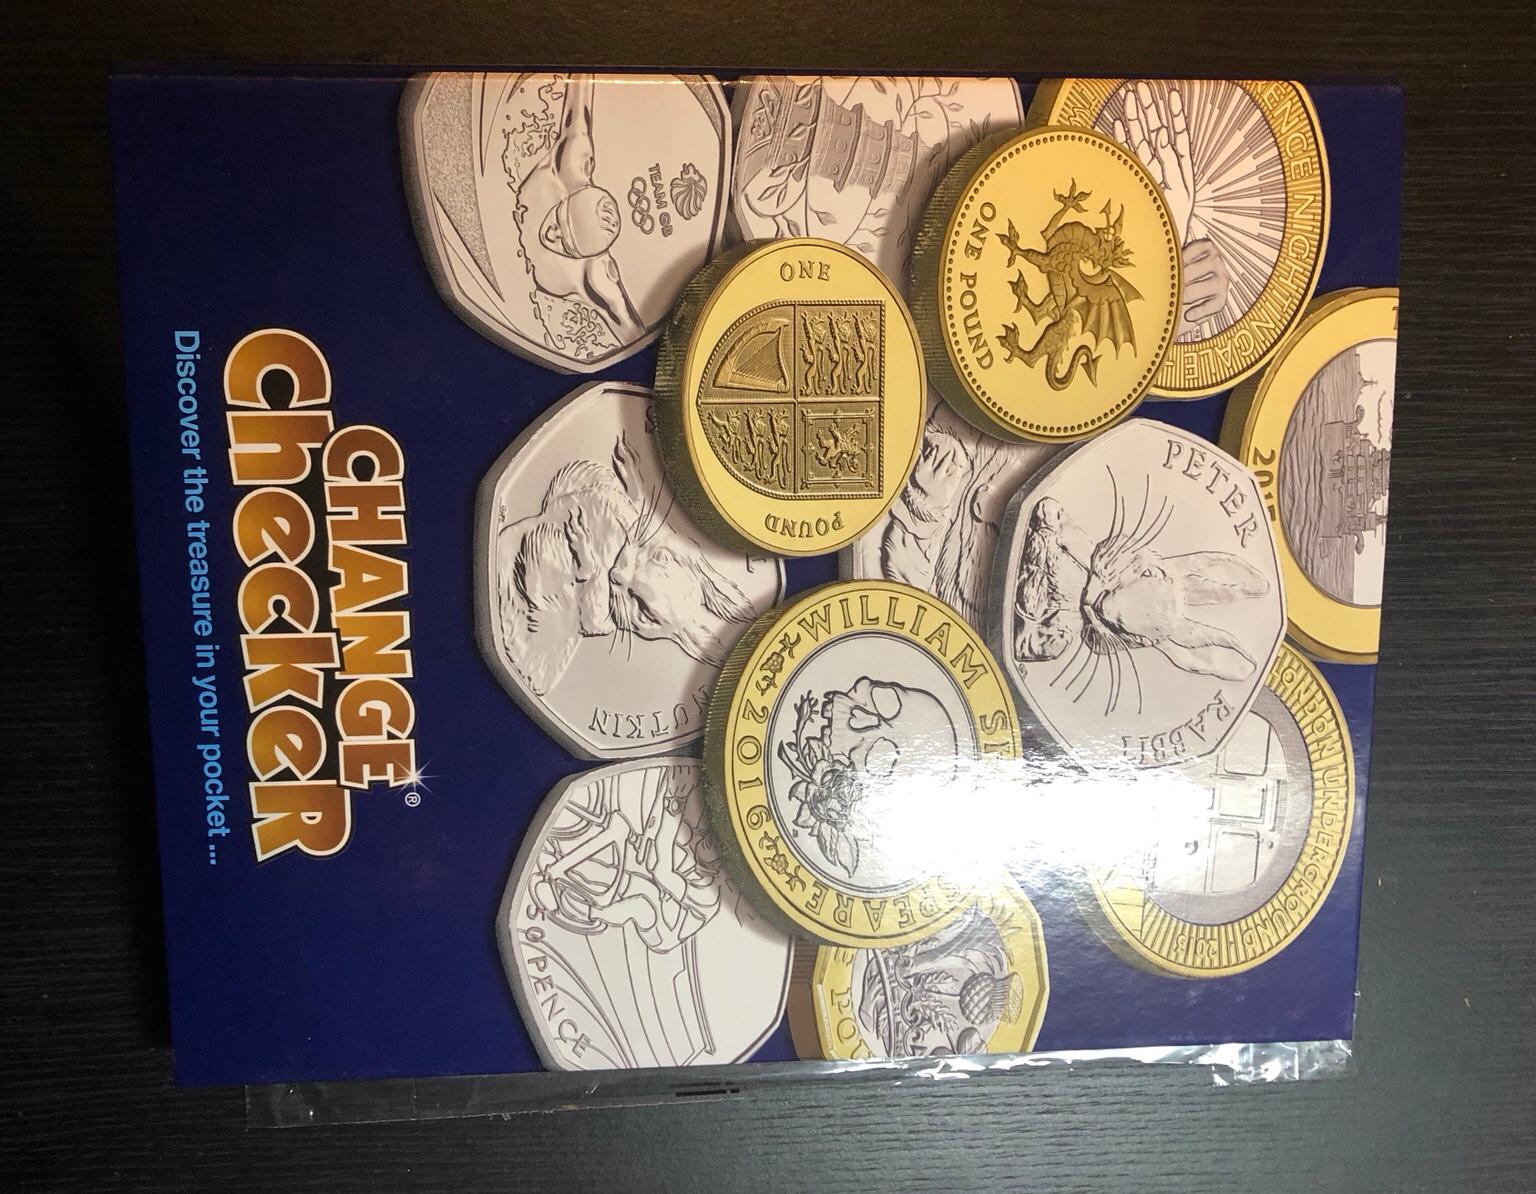 Change Checker A-Z of Great Britain Collectors Medal